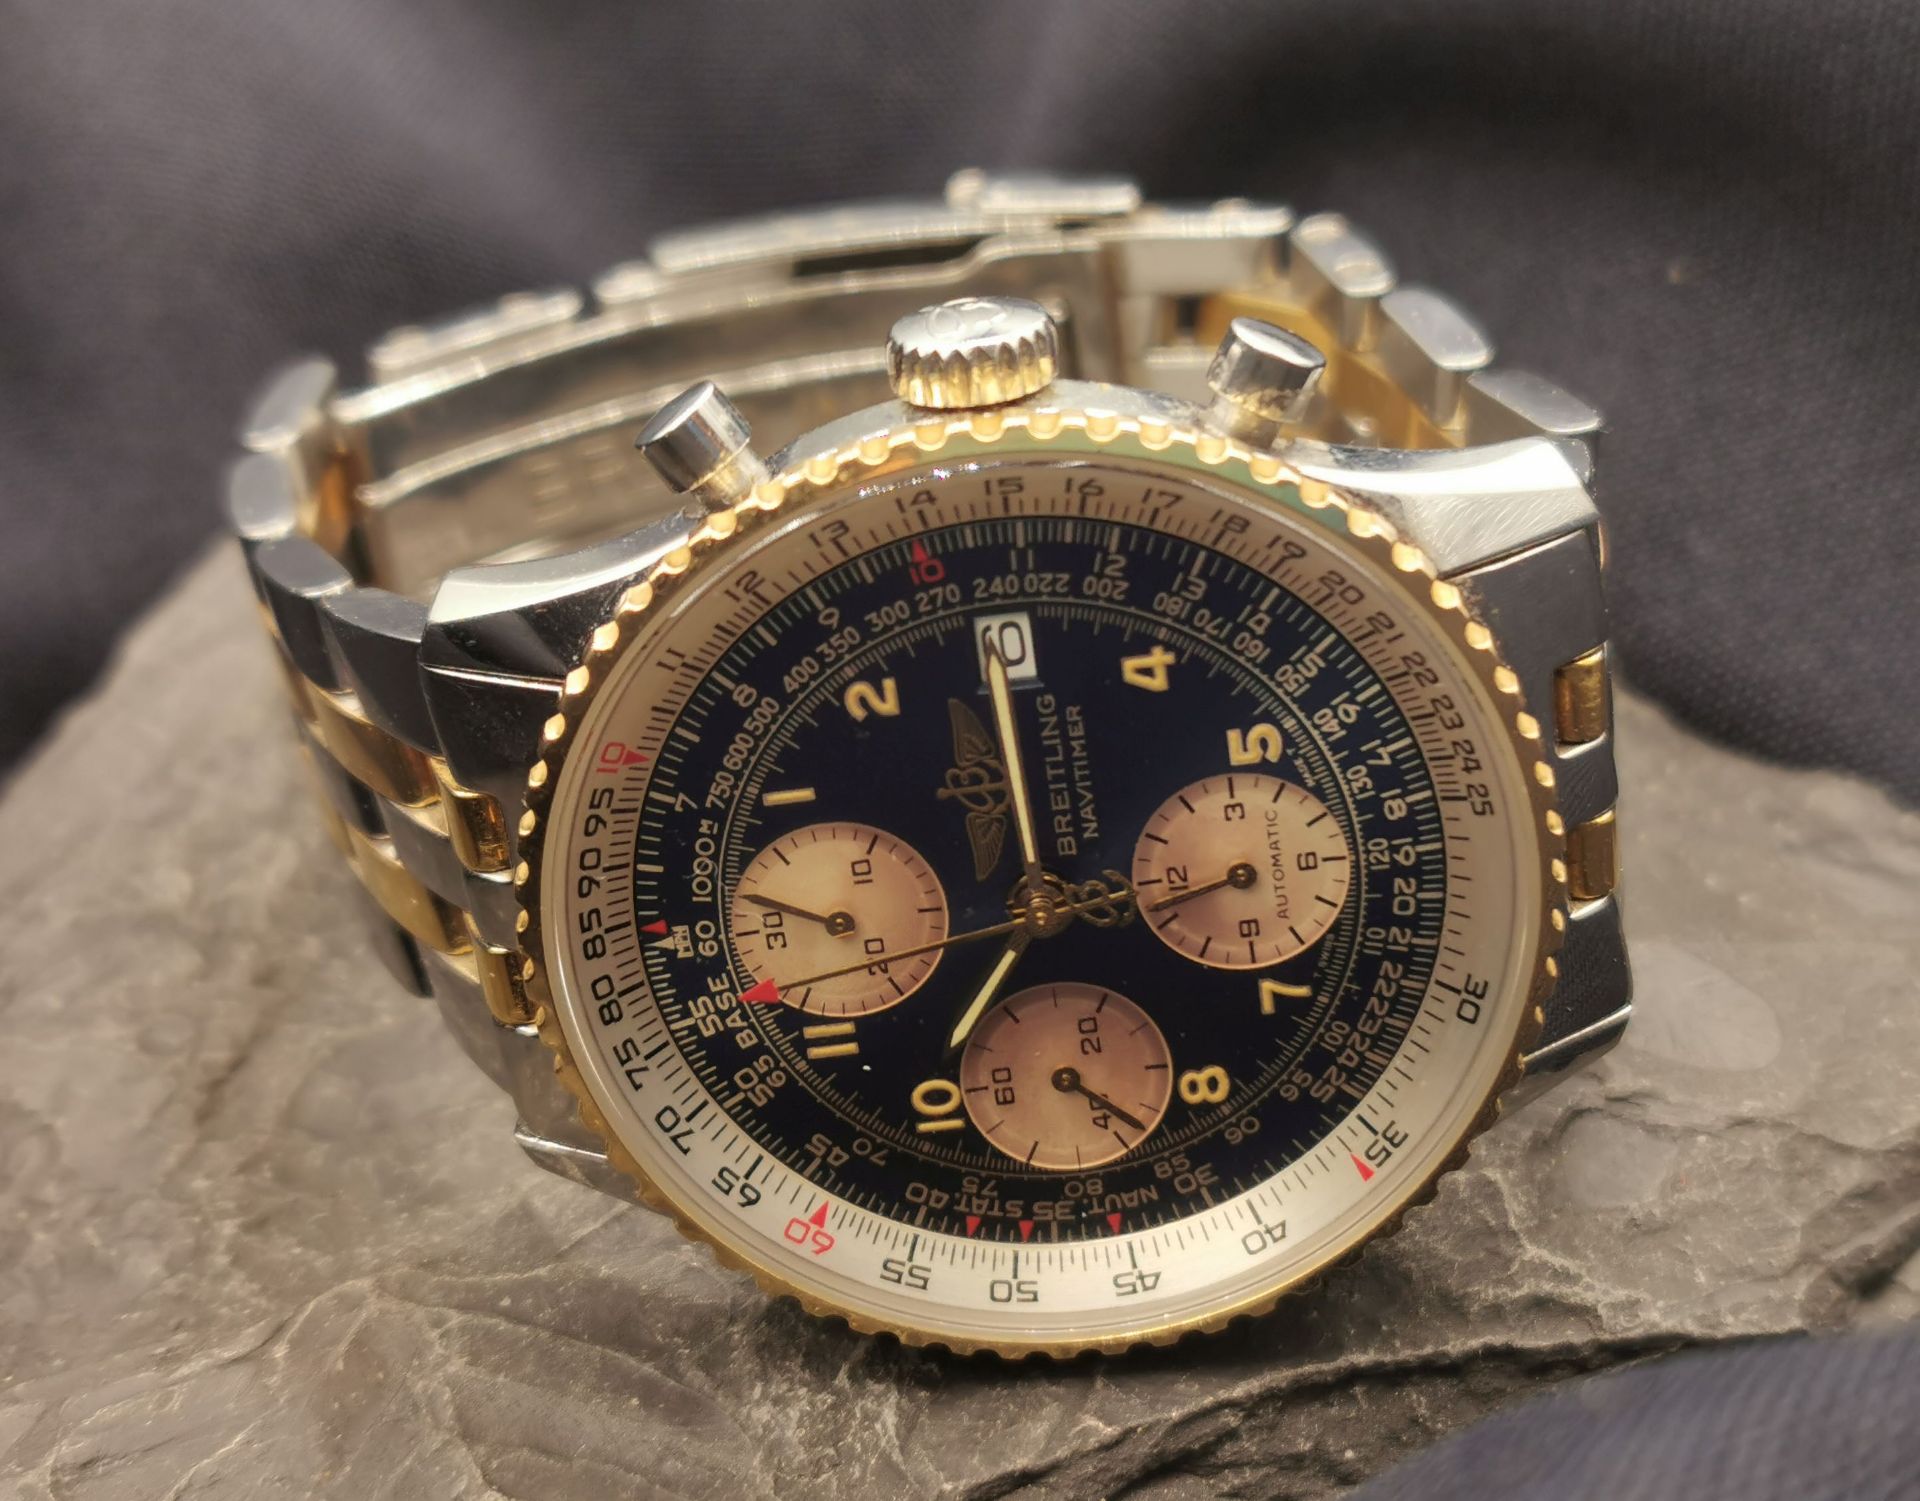 BREITLING NAVITIMER MALE WATCH - Image 2 of 13